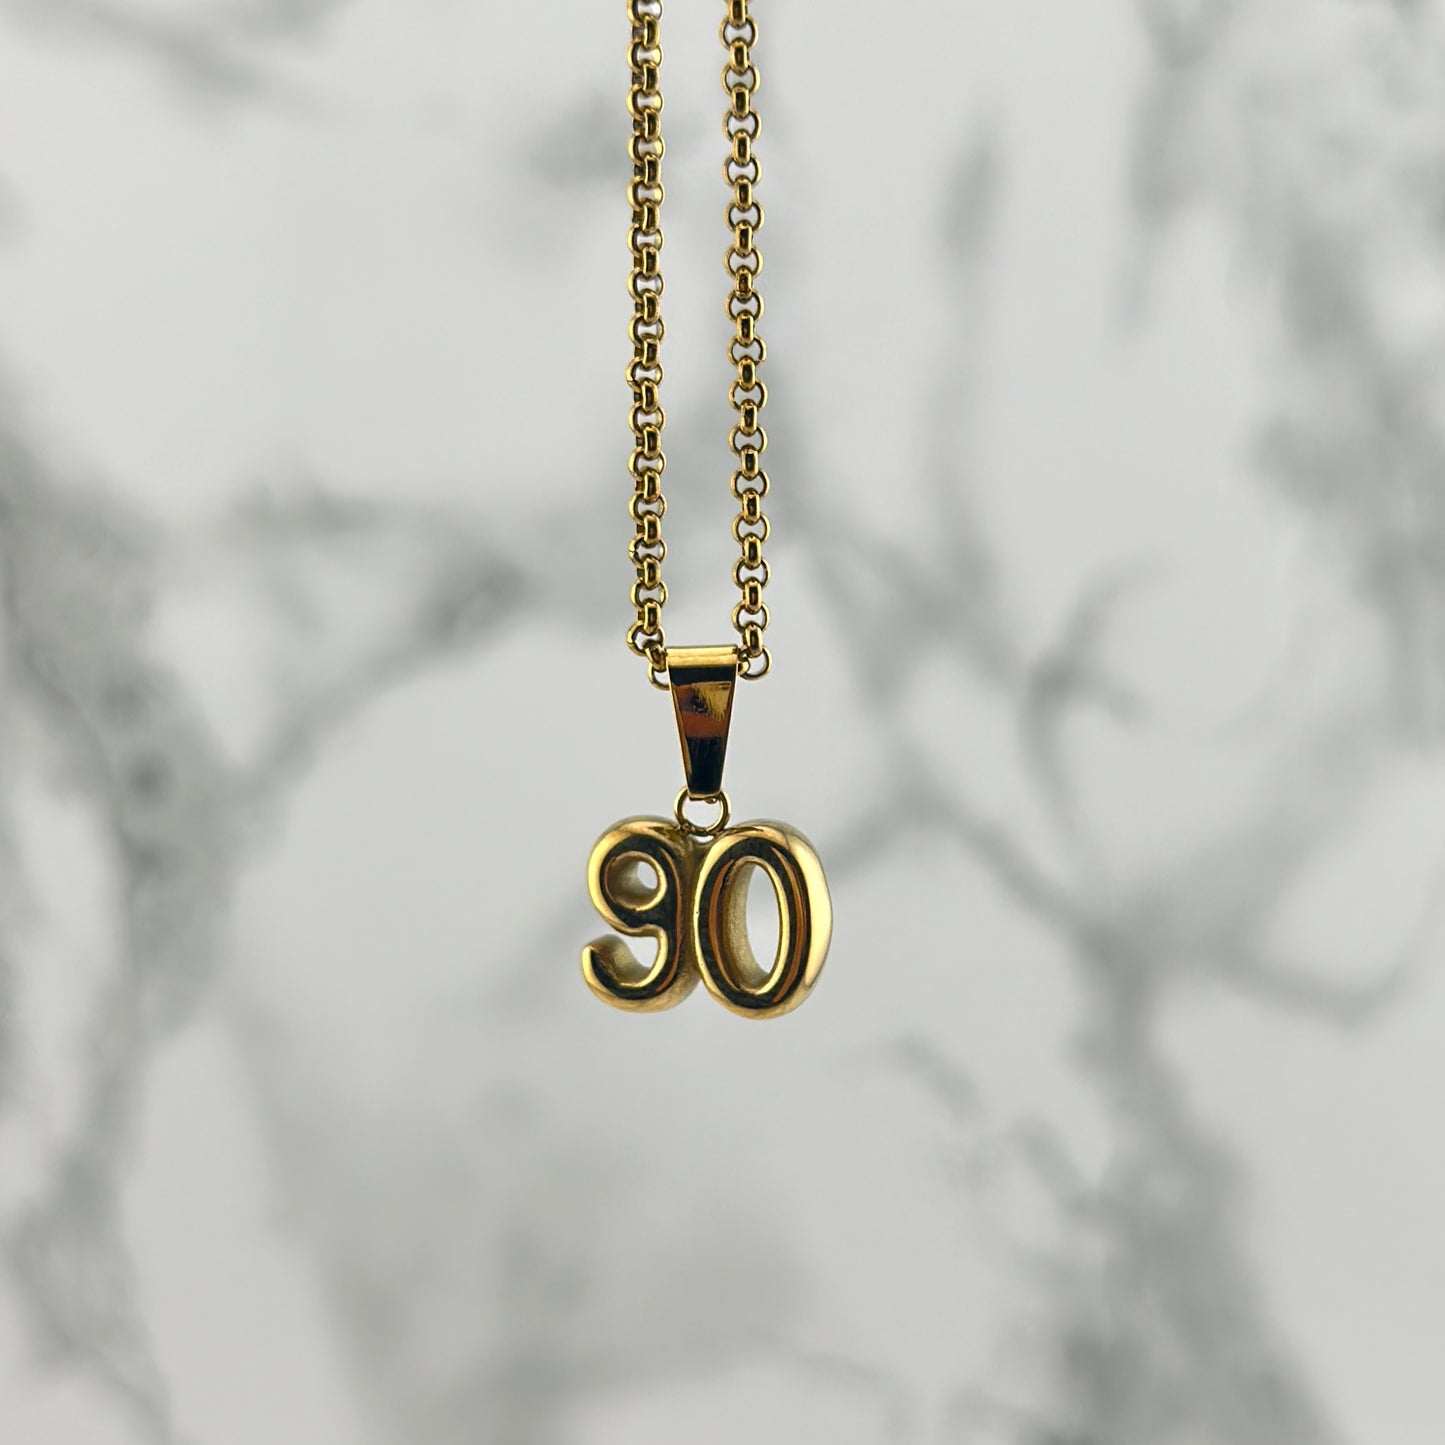 90’s Necklace